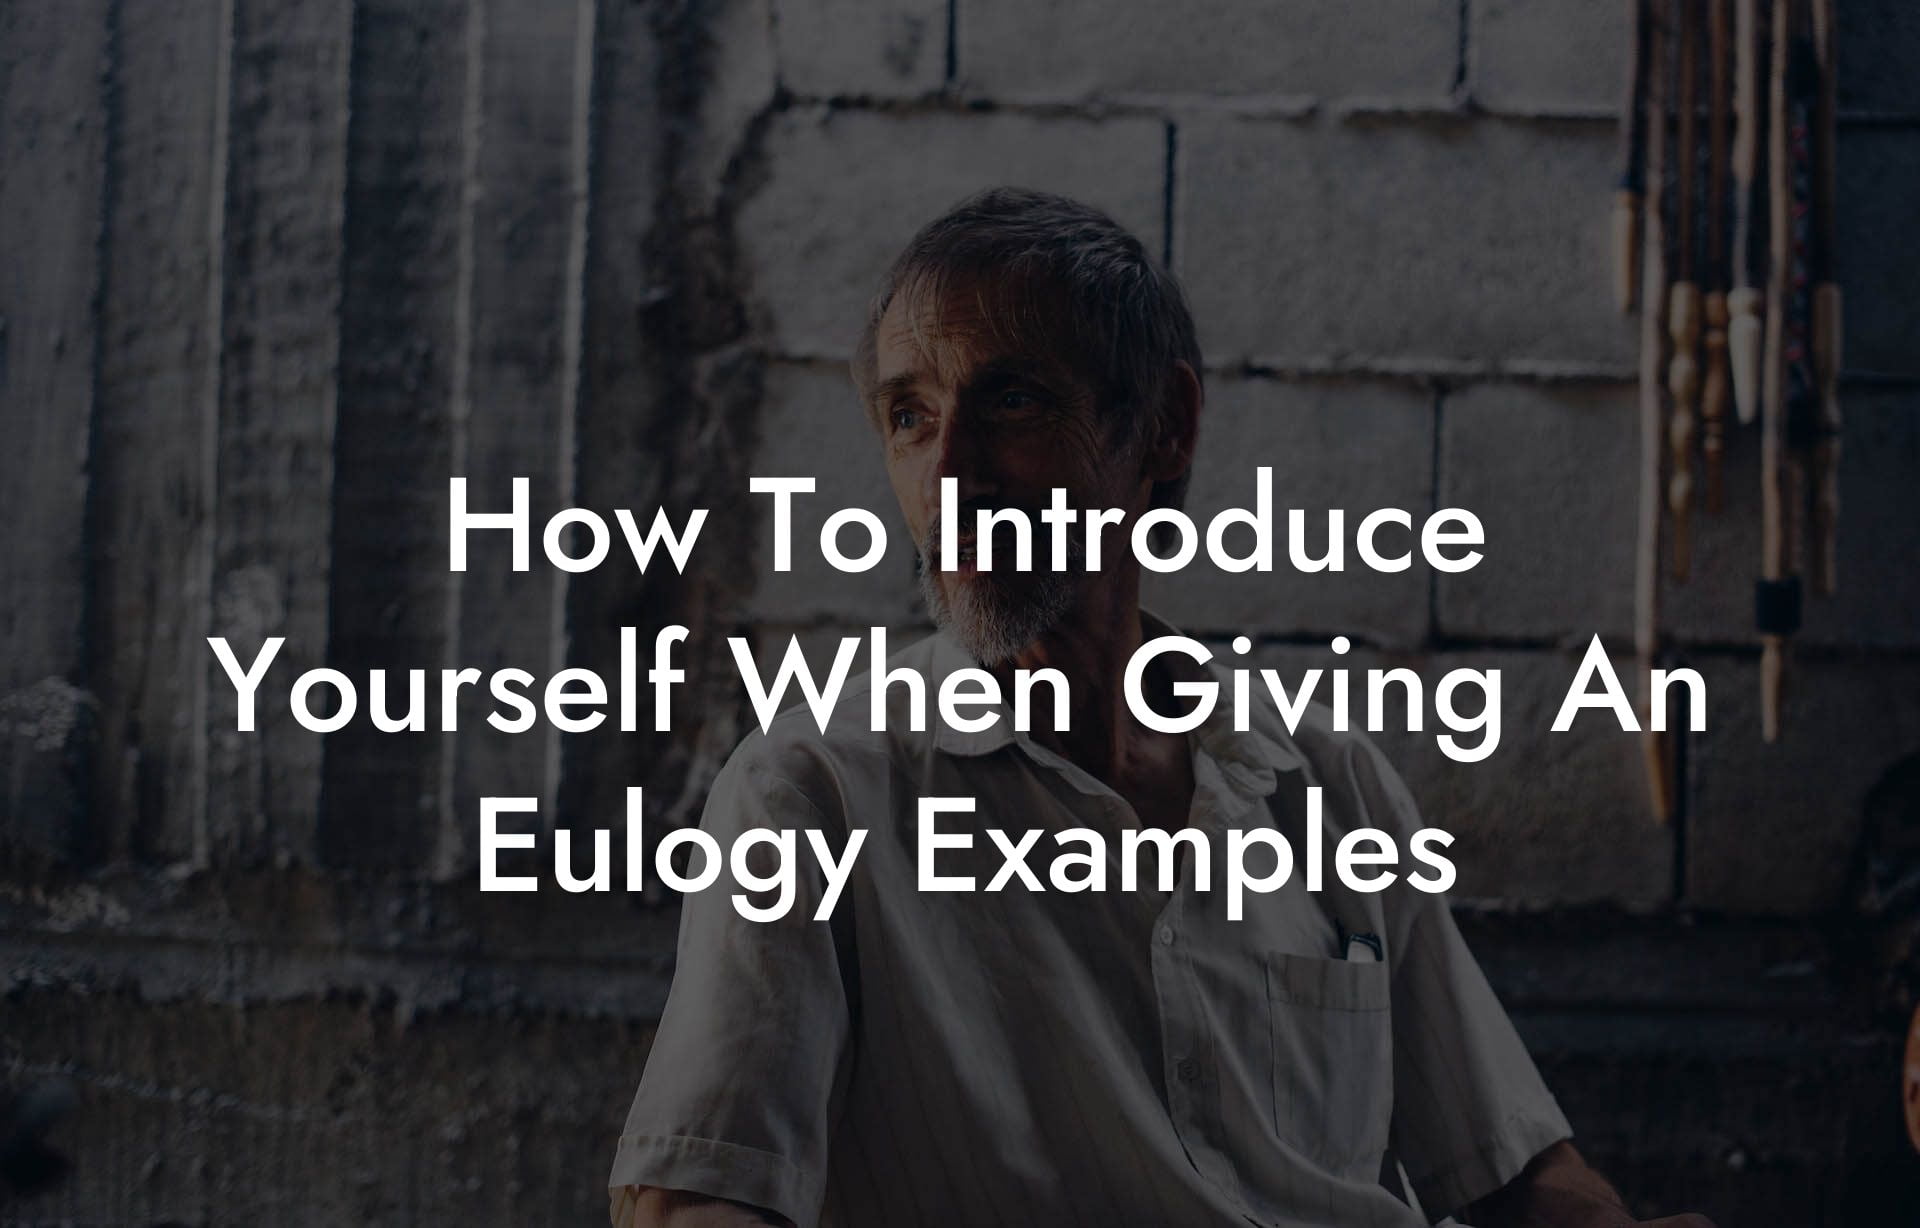 How To Introduce Yourself When Giving An Eulogy Examples